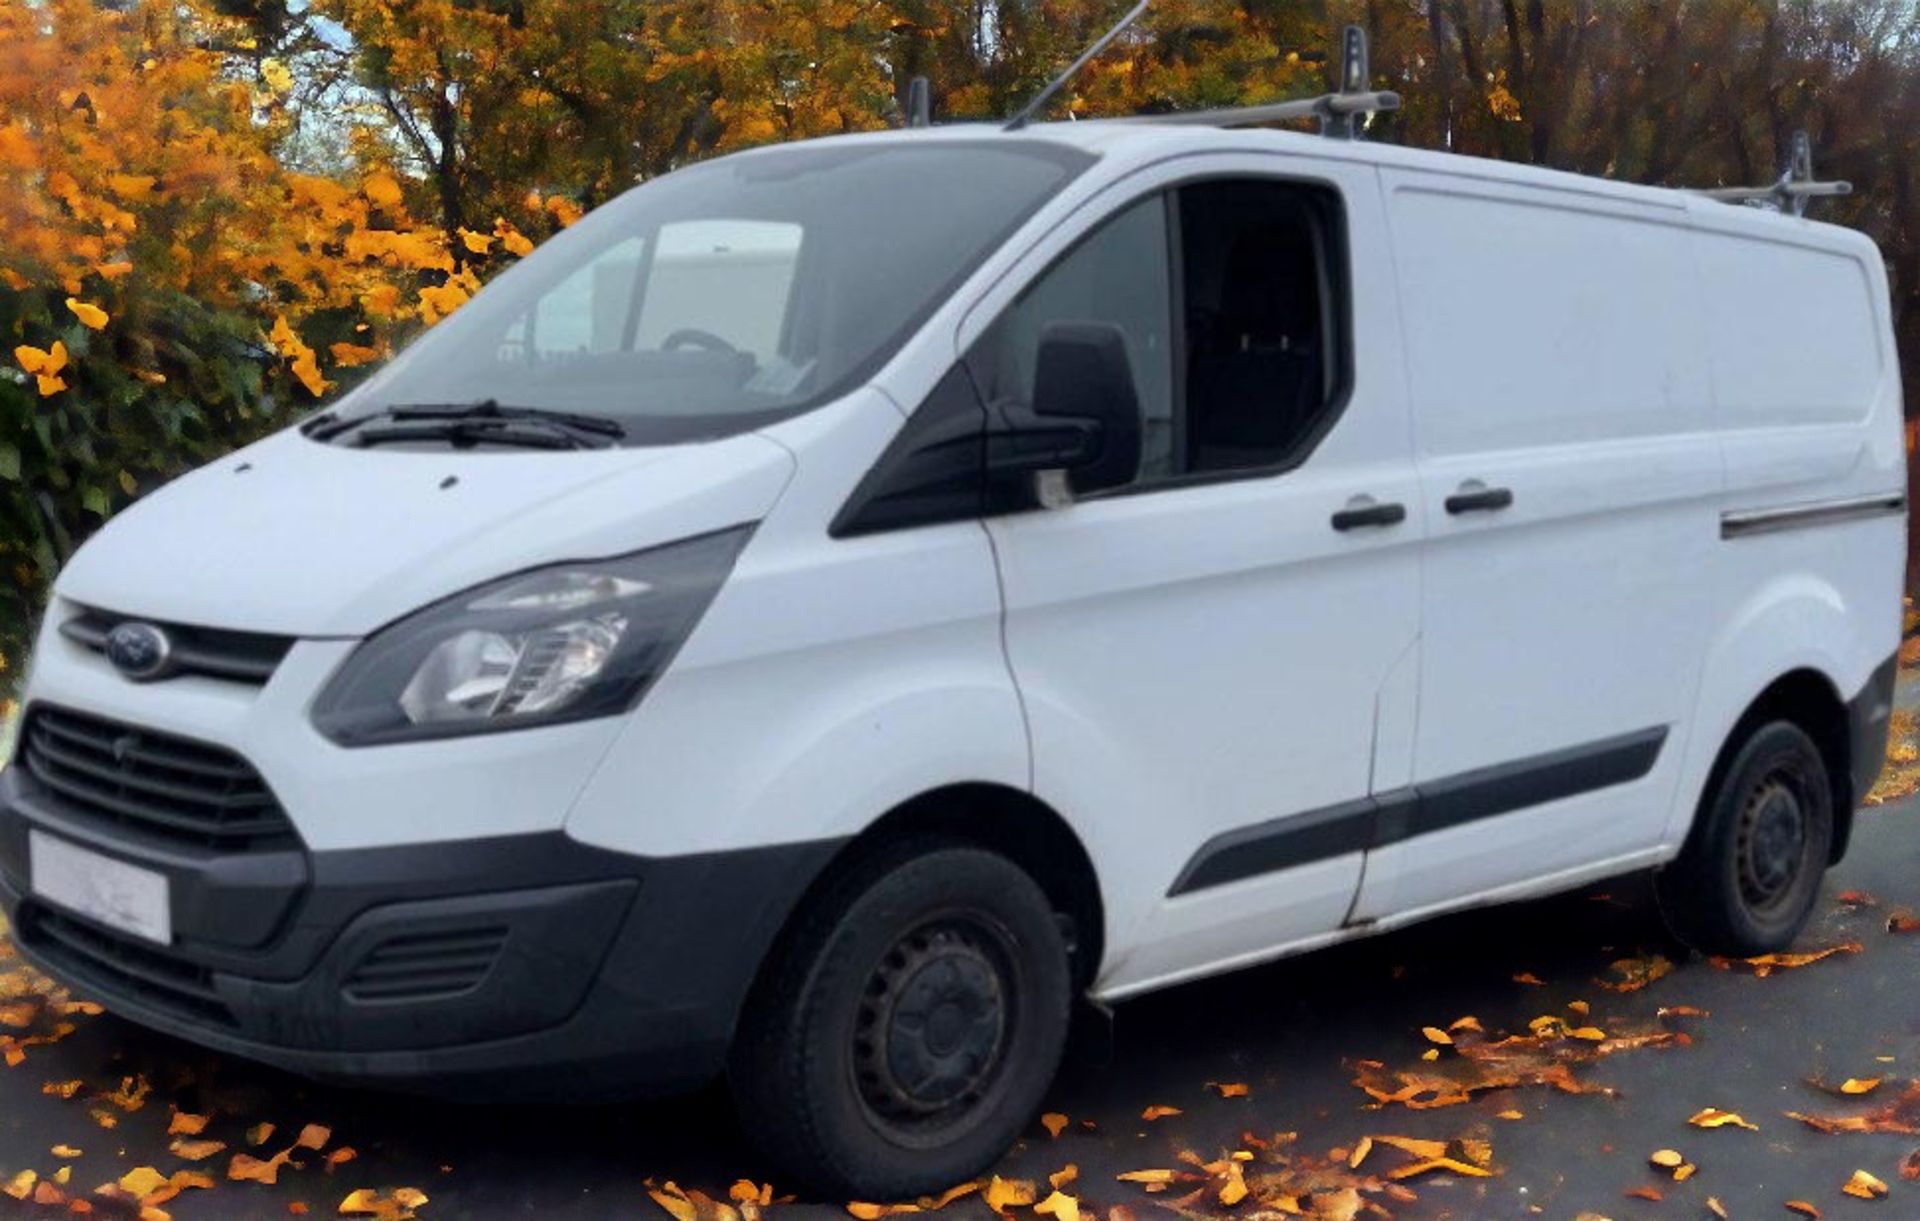 2015 FORD TRANSIT CUSTOM PANEL VAN - RELIABLE AND EFFICIENT WORKHORSE